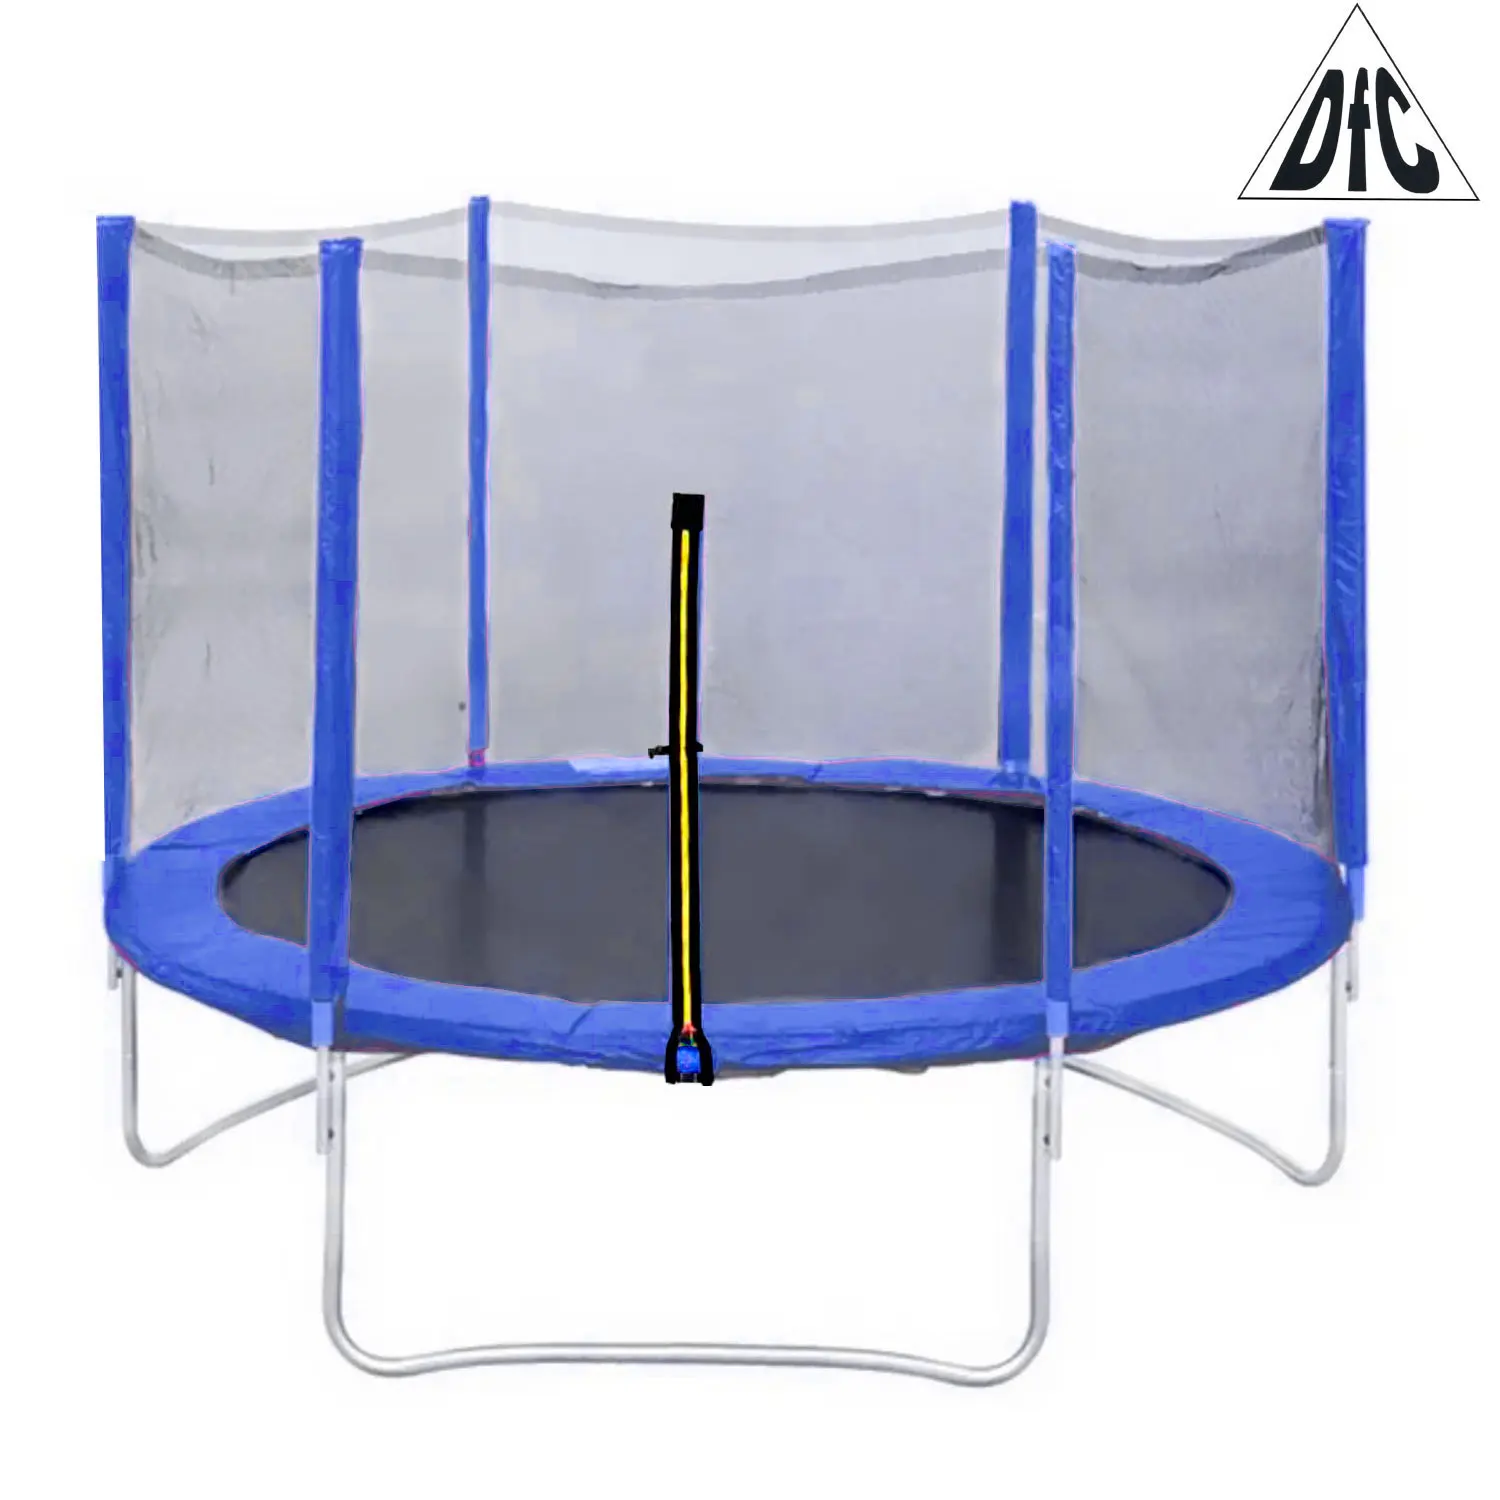 Haast je condensor Bounty Trampoline fitness 14ft with mesh blue 14ft tr b|Trampolines| - AliExpress